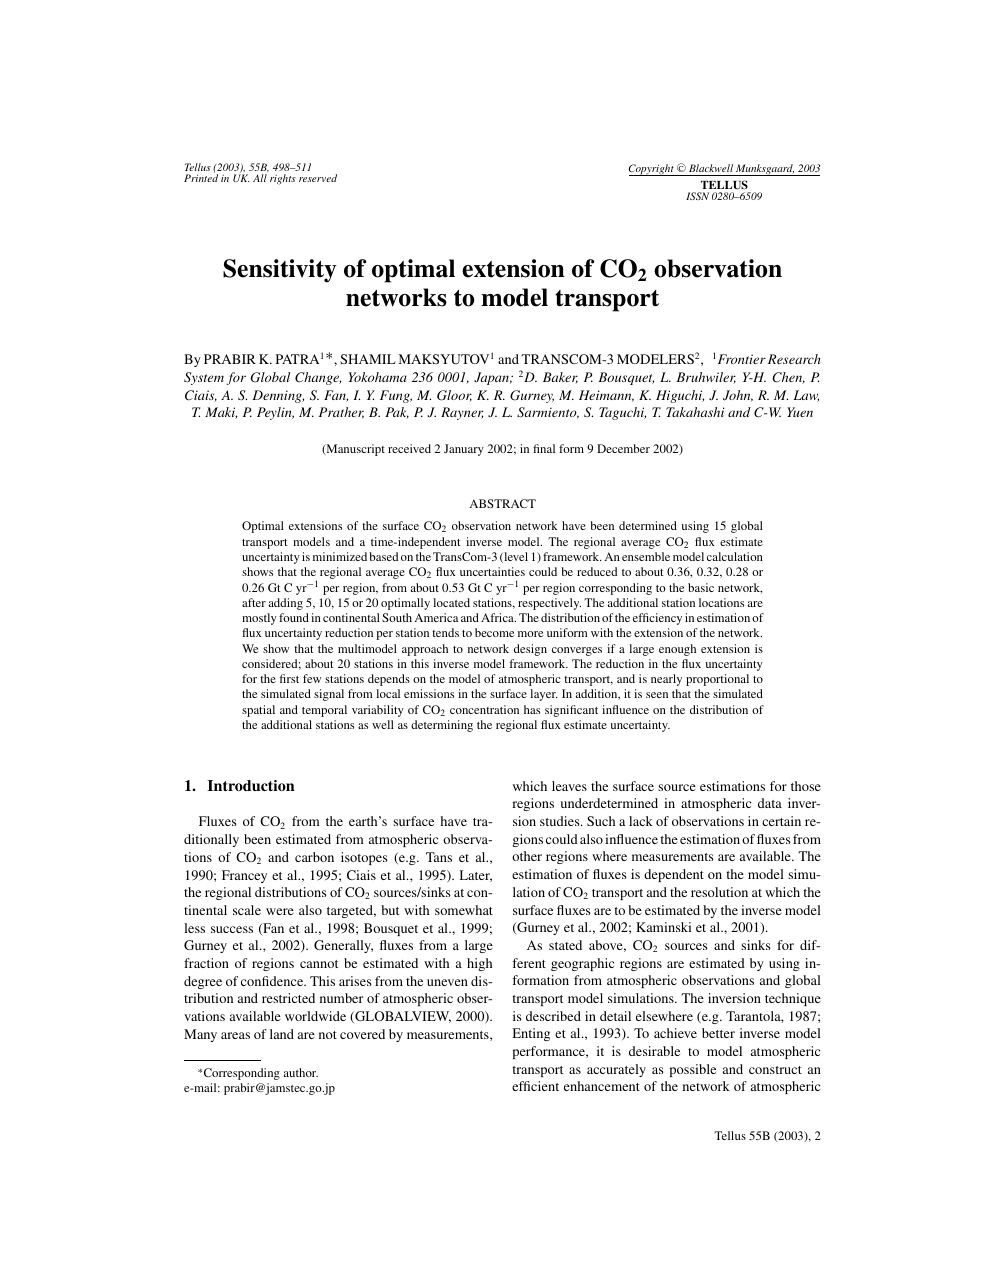 Sensitivity Of Optimal Extension Of Co2 Observation Networks To Model Transport Topic Of Research Paper In Earth And Related Environmental Sciences Download Scholarly Article Pdf And Read For Free On Cyberleninka